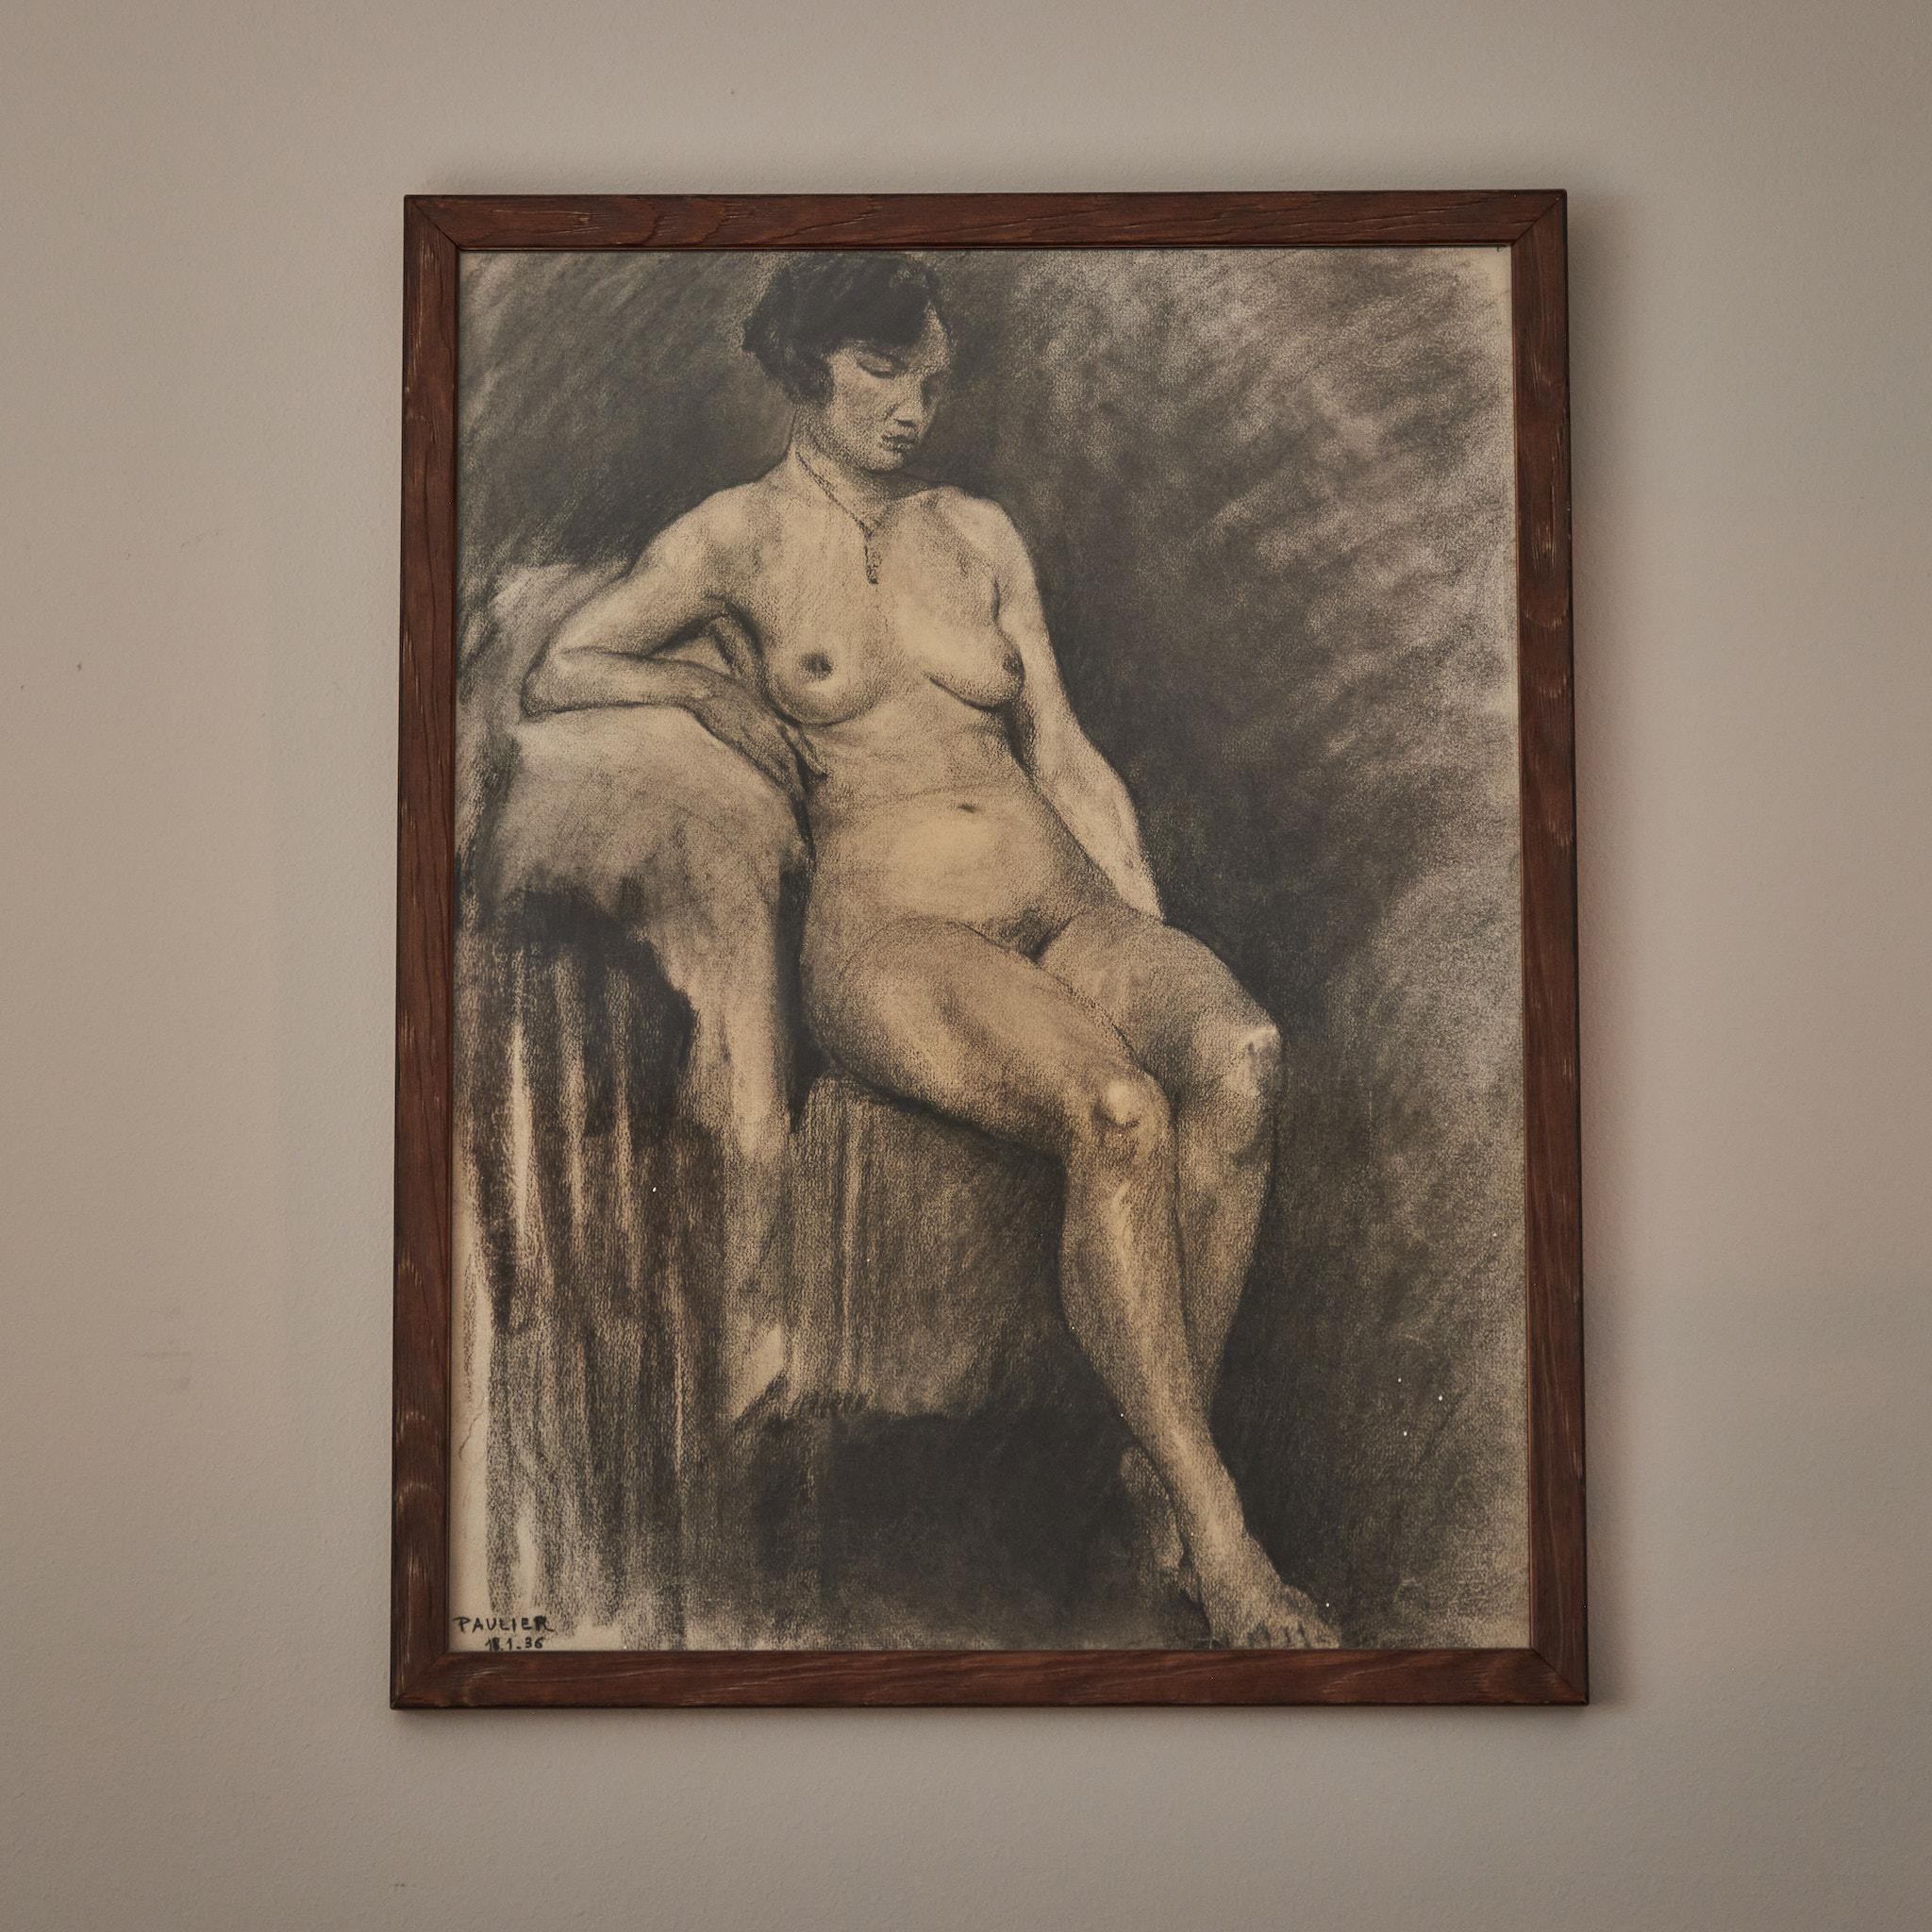 Early 20th-century French Academy-style charcoal drawing of seated nude female model. Mounted in a custom wood frame, the image has an introspective quality, and a beautiful sense of line. 
